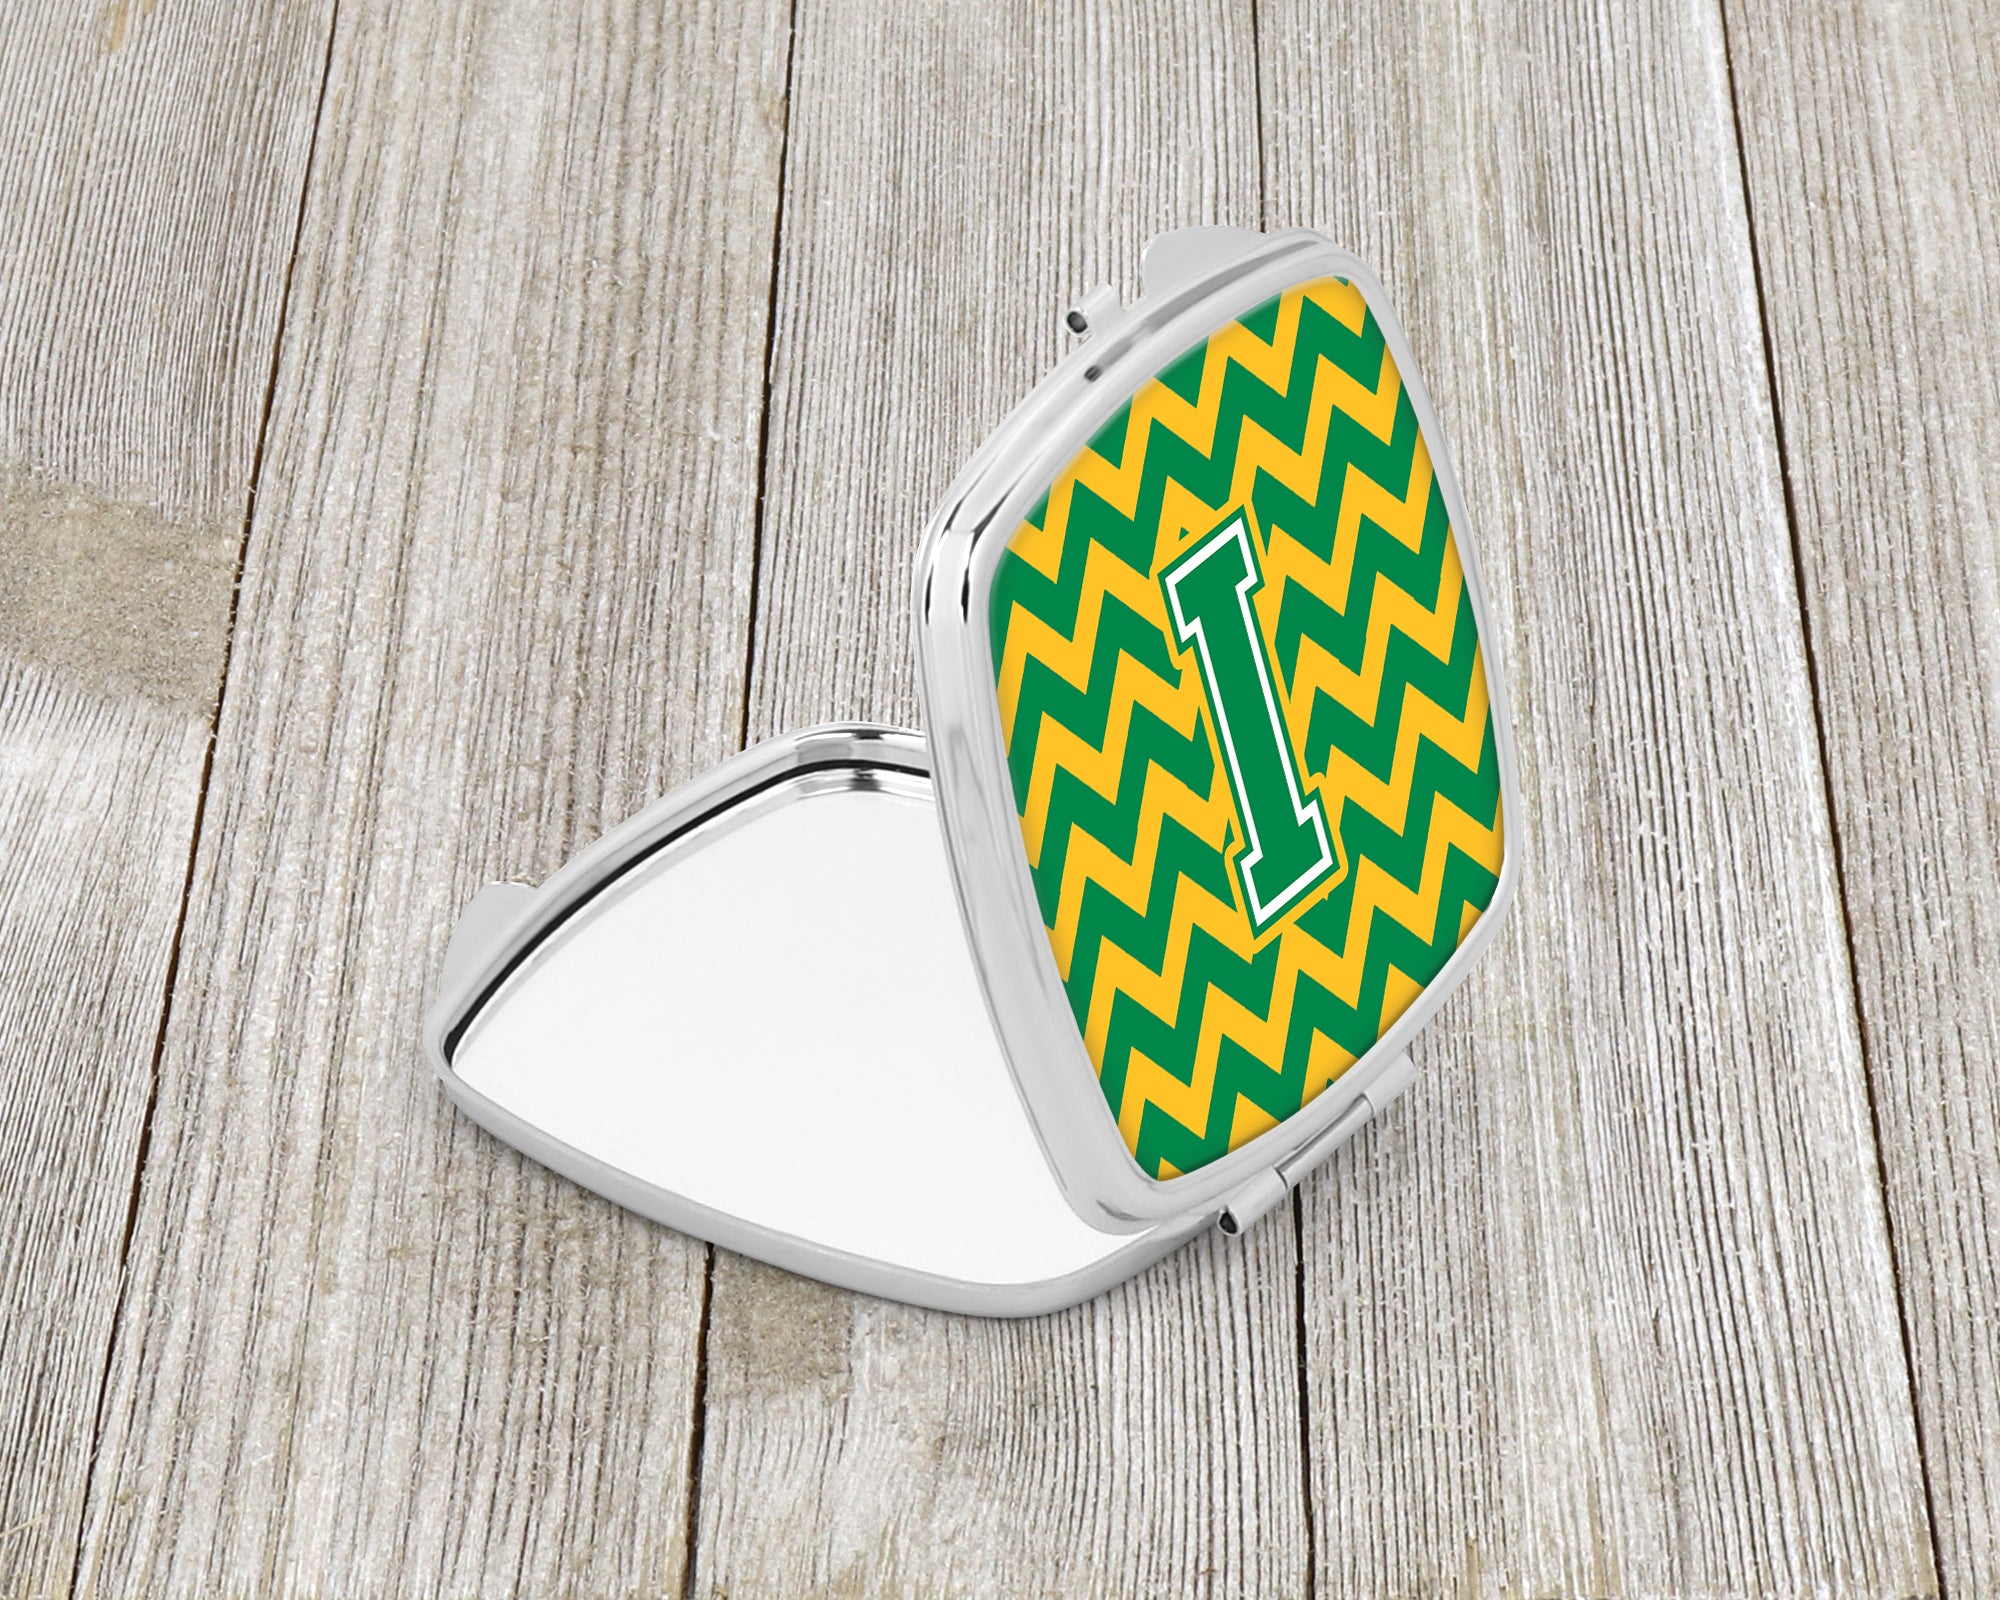 Letter I Chevron Green and Gold Compact Mirror CJ1059-ISCM  the-store.com.